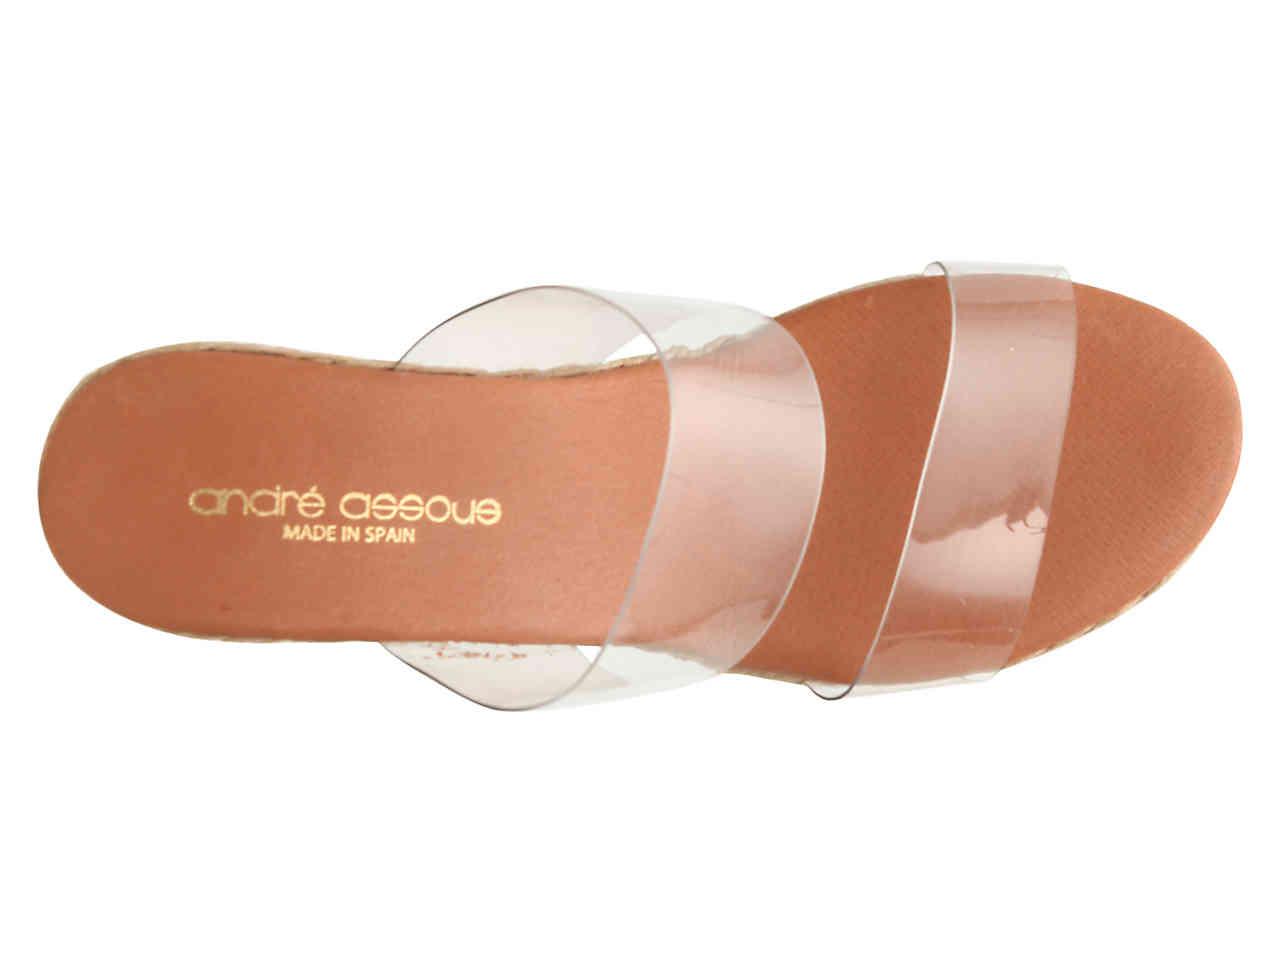 andre assous clear wedge